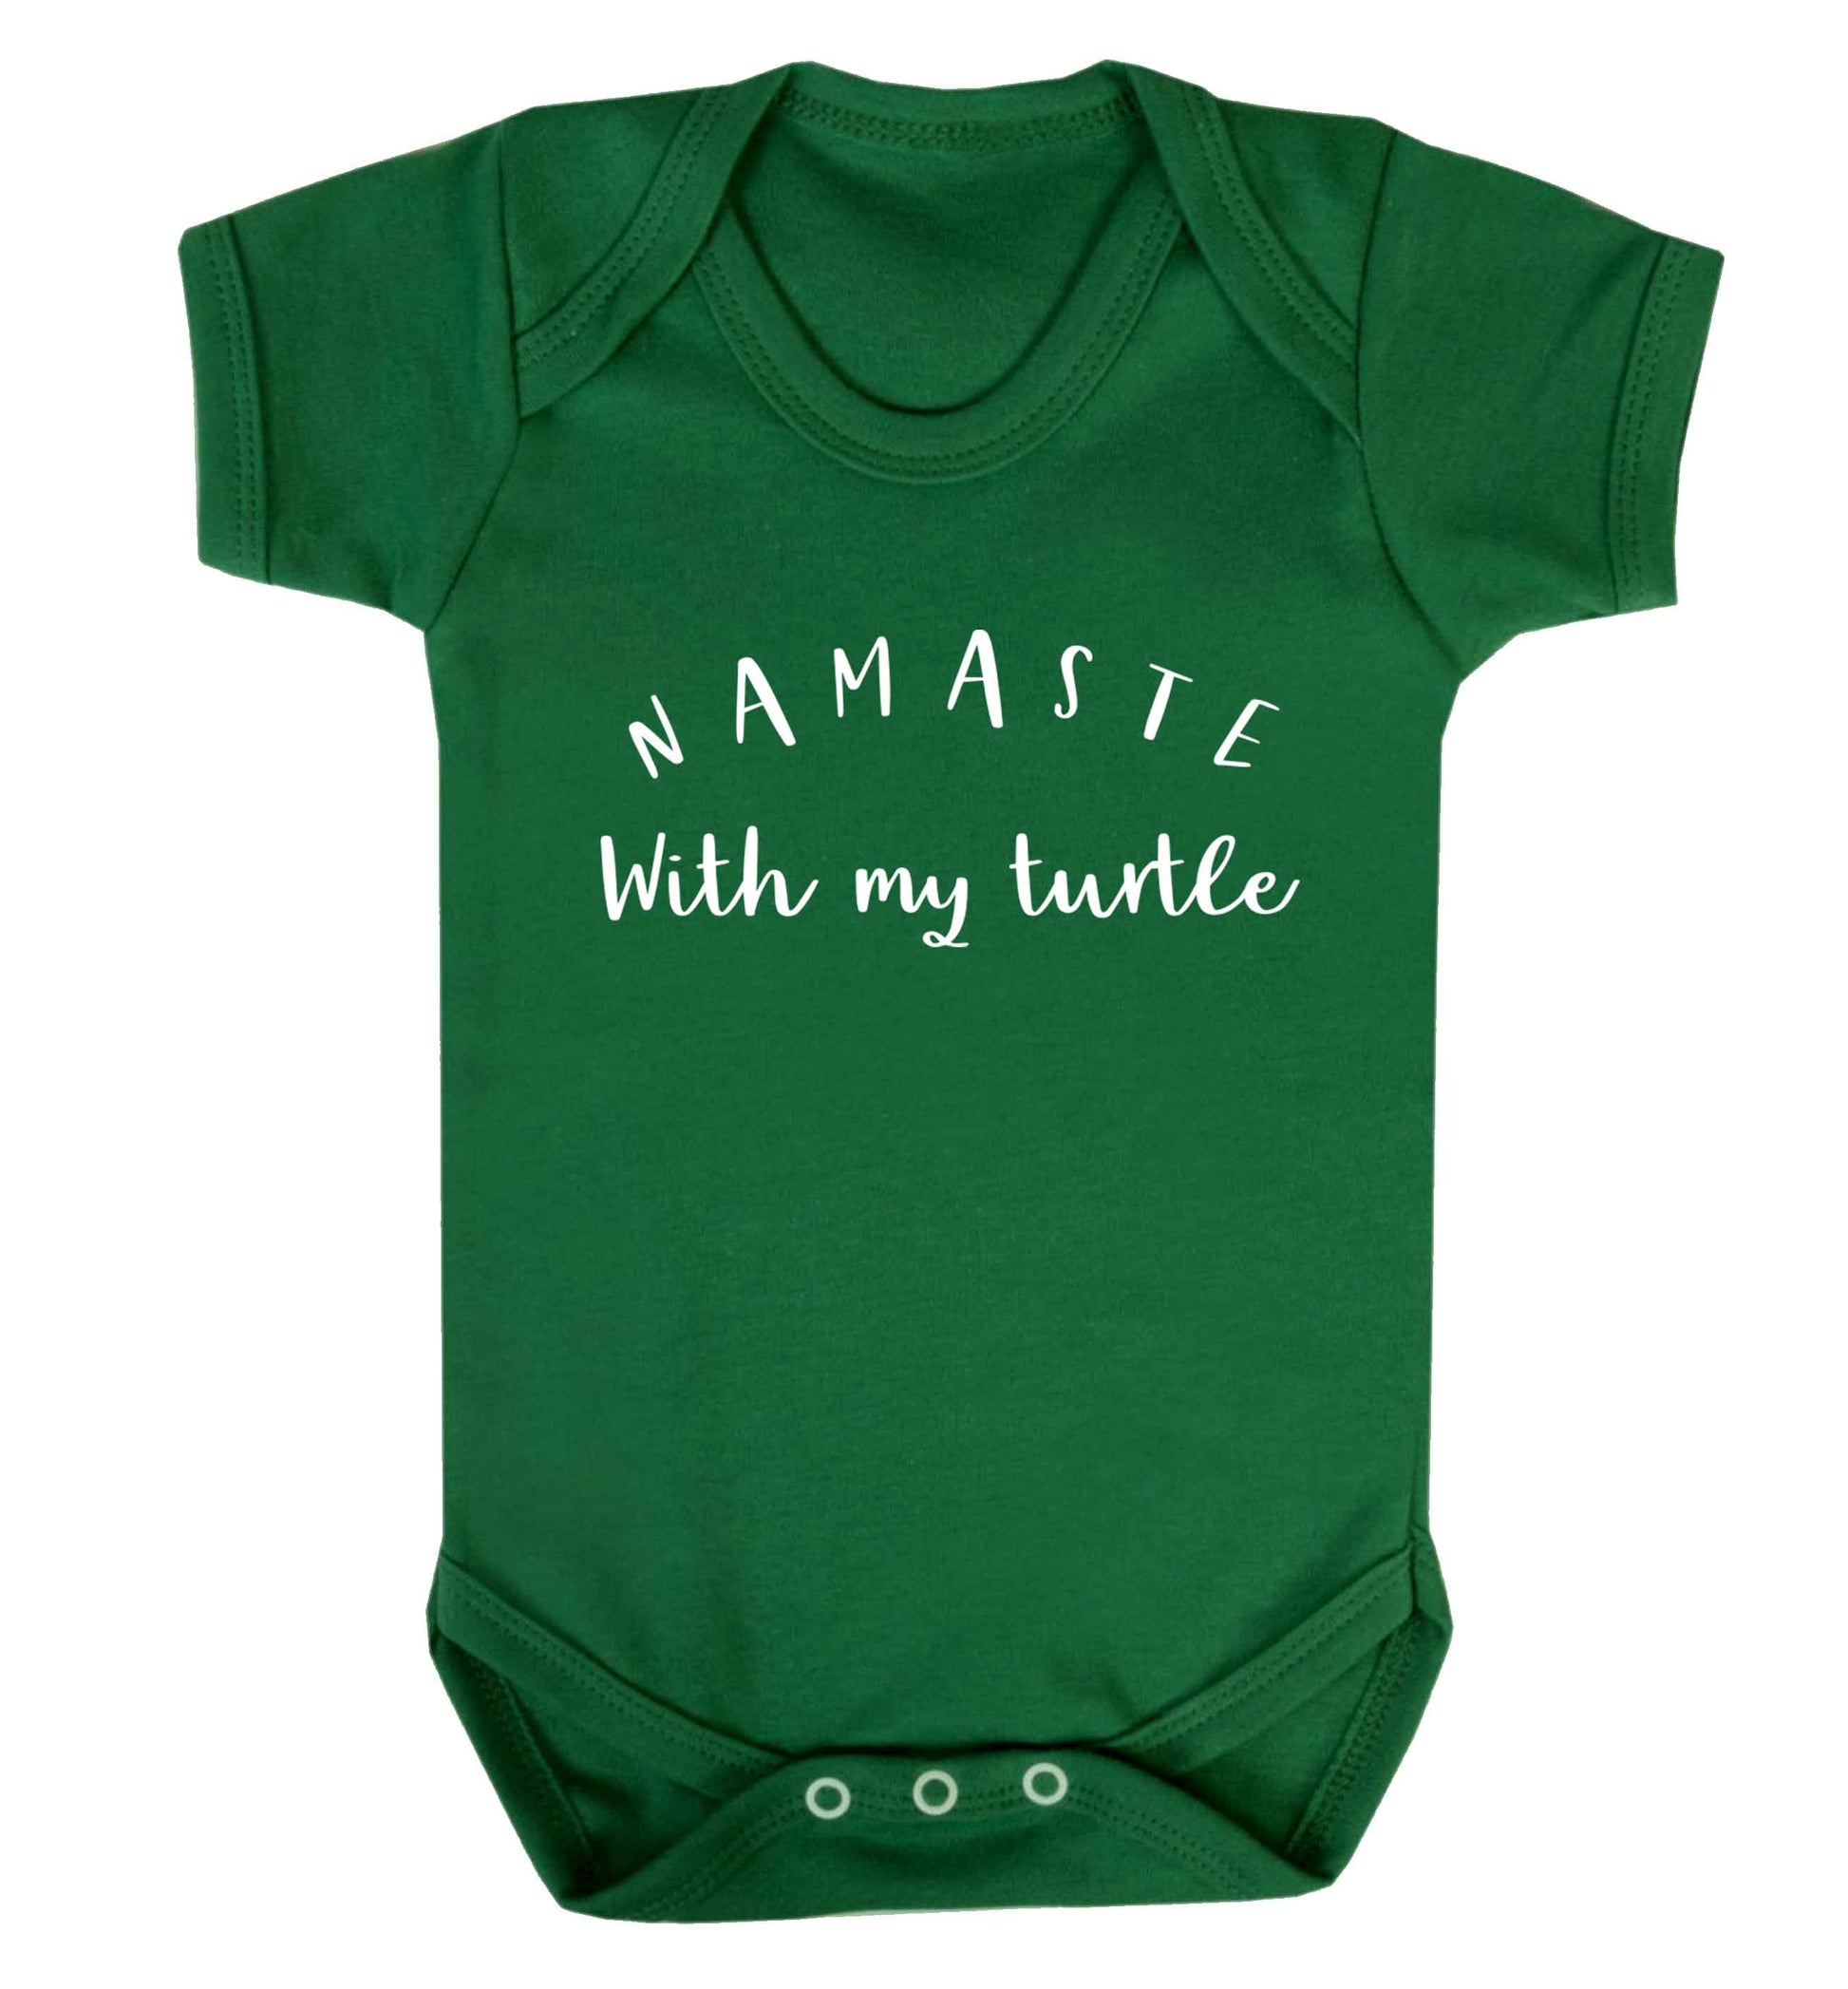 Namaste with my turtle Baby Vest green 18-24 months